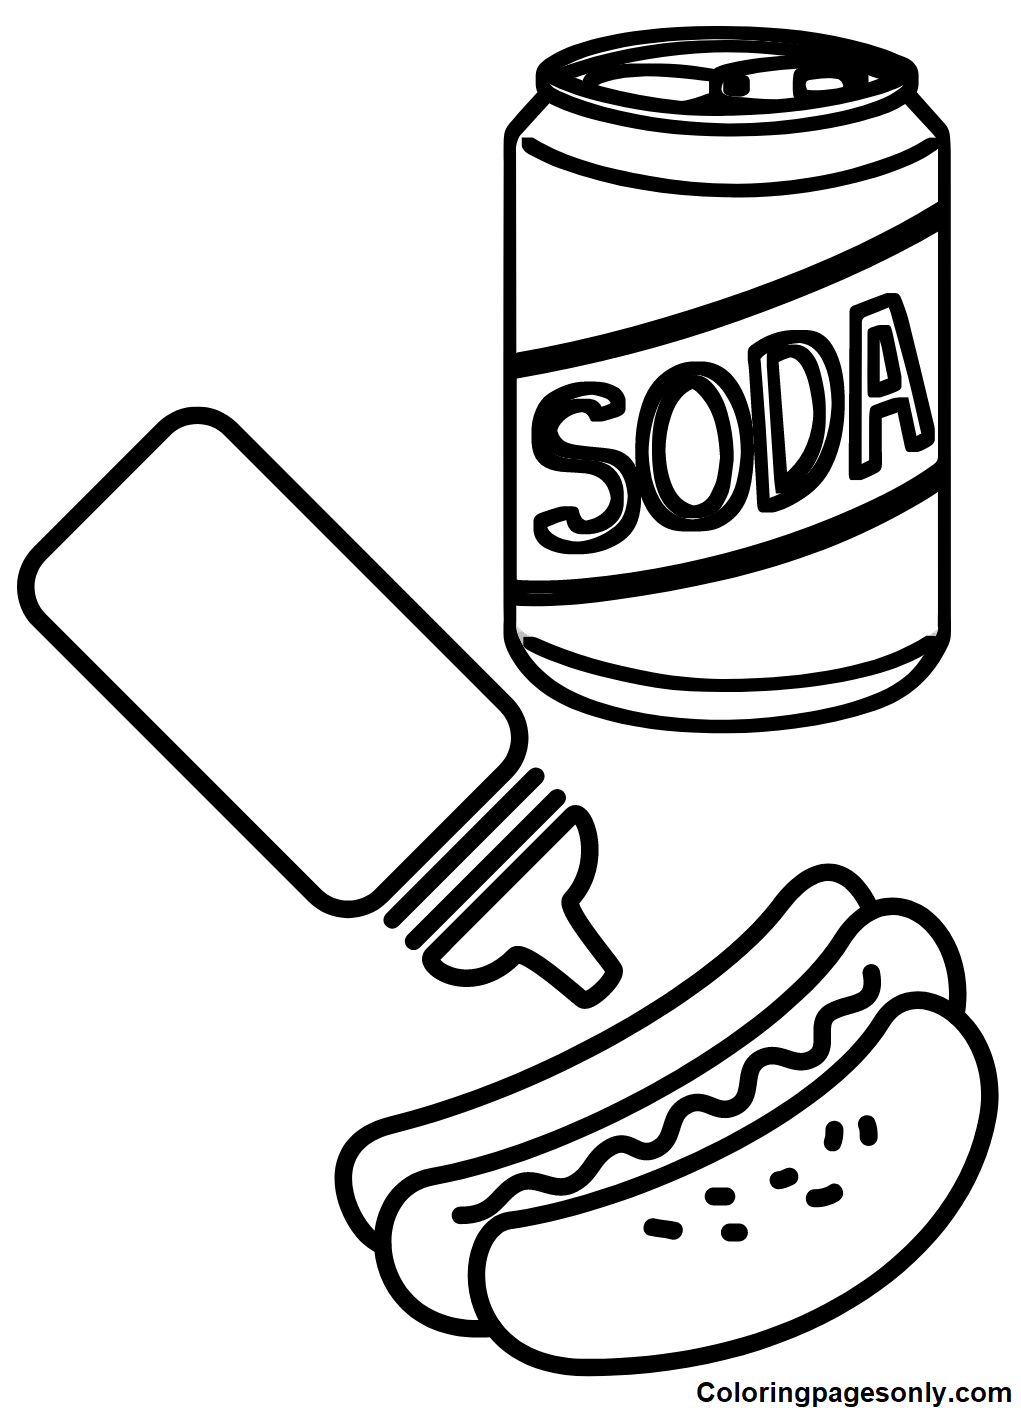 Hot Dog with Sauces and Soda Coloring Pages